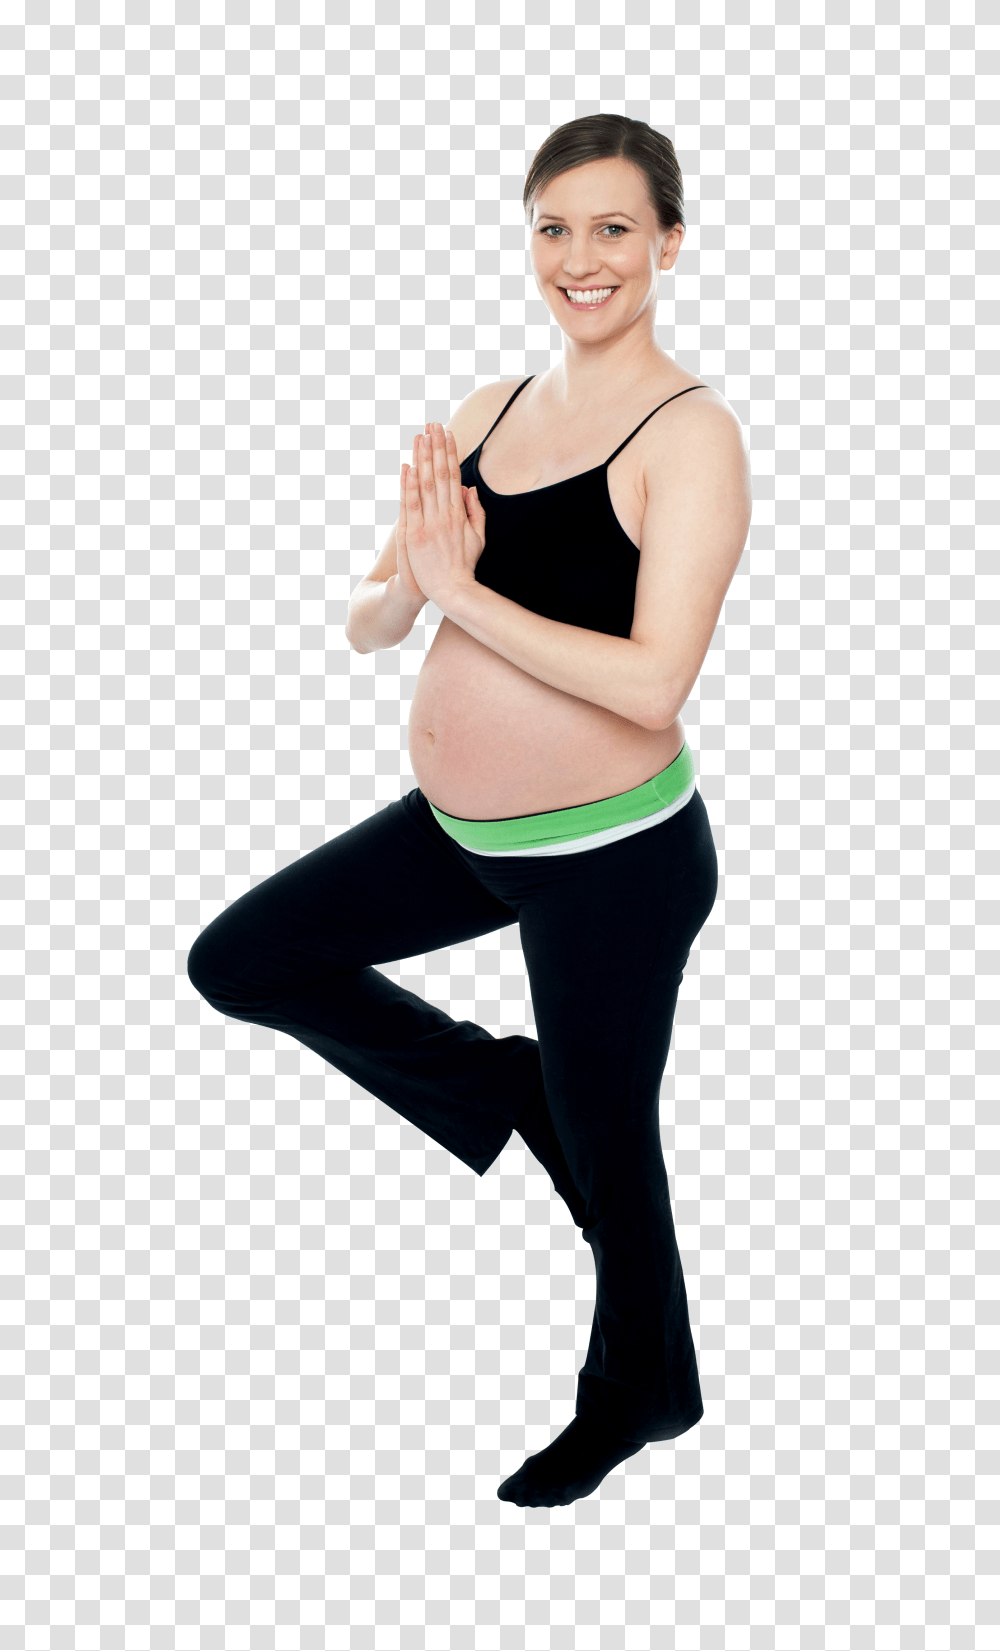 Pregnant Woman Exercise Image, Person, Female, Dance Pose Transparent Png